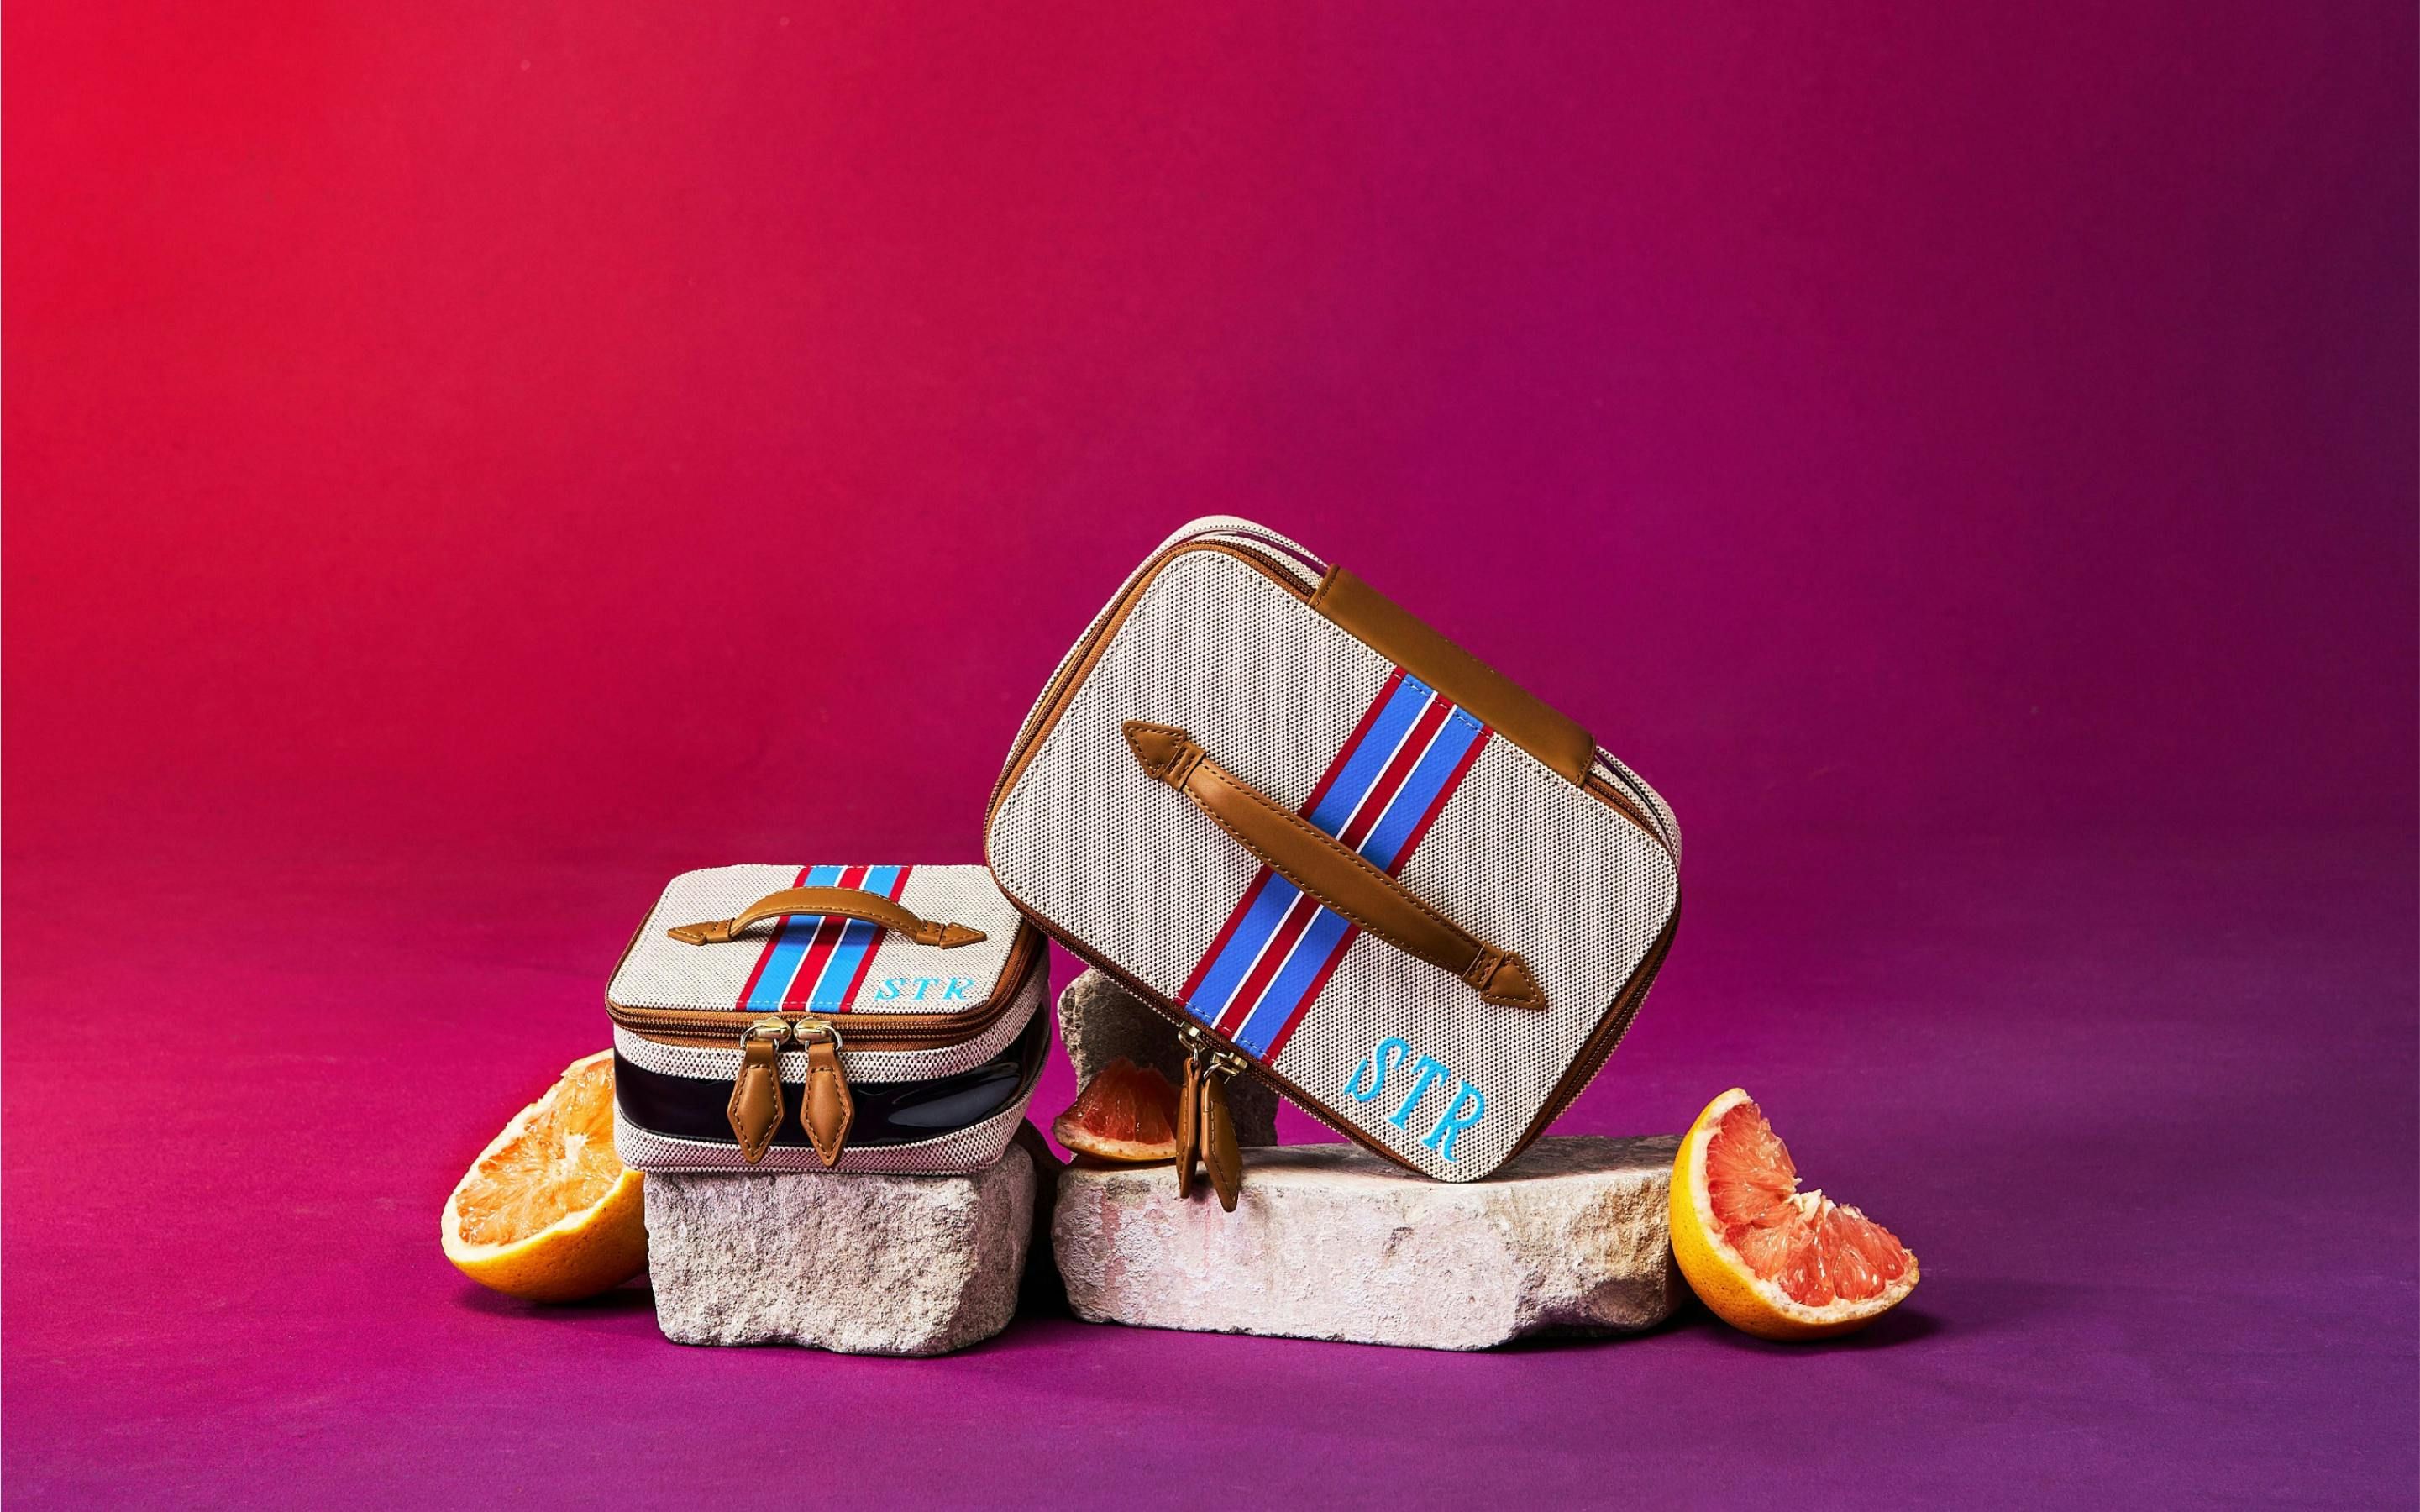 Two embroidered Paravel bags sitting on rocks shot on a gradient background with orange slices